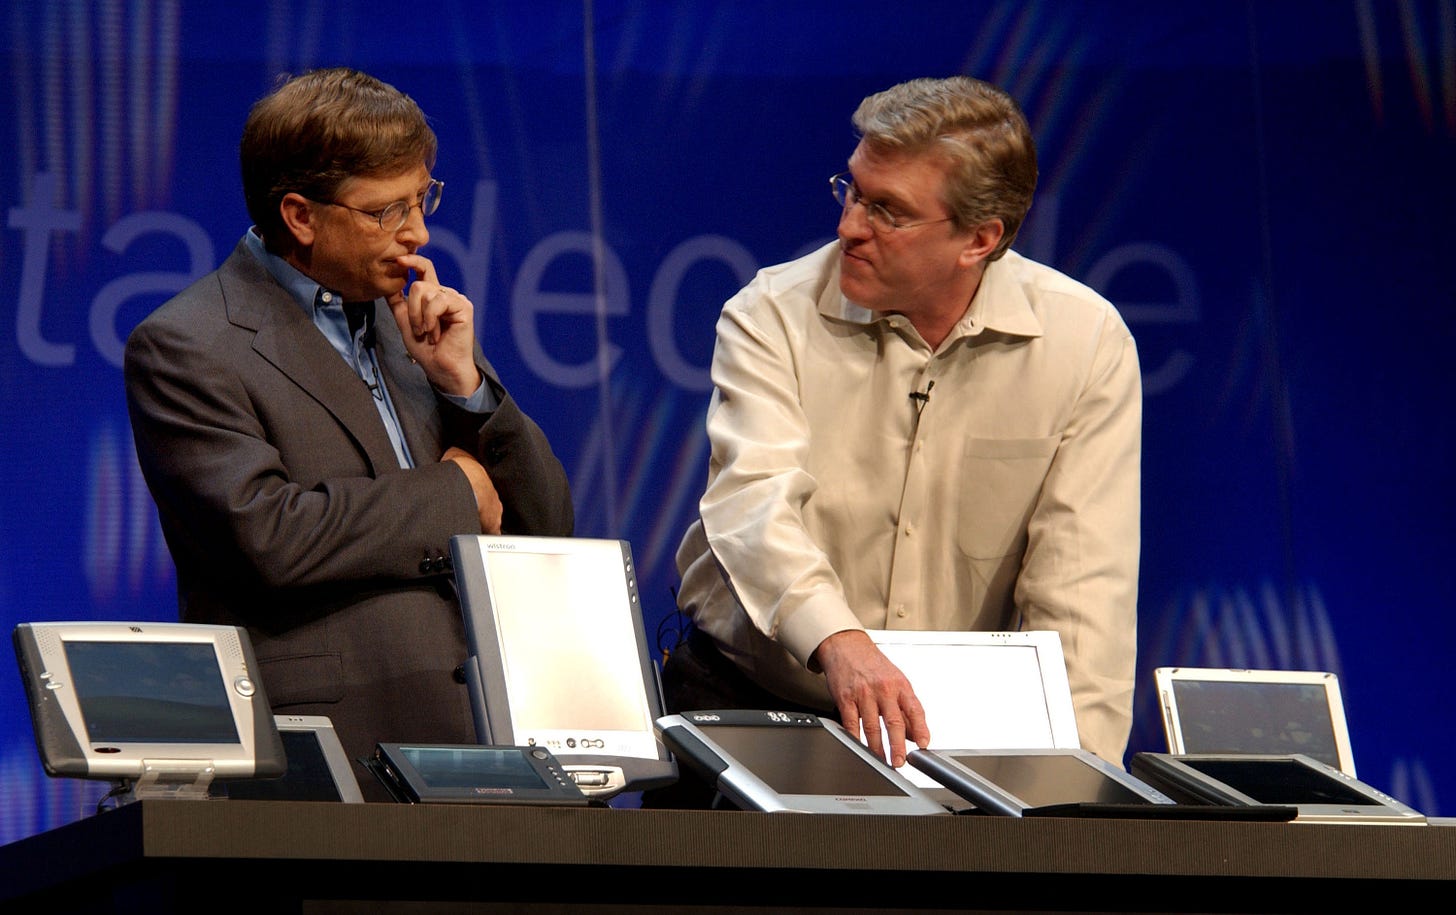 Bill Gates and Jeff Raikes on stage at Comdex 2001 looking at a collection of Windows PCs designed for Windows XP Tablet Edition.